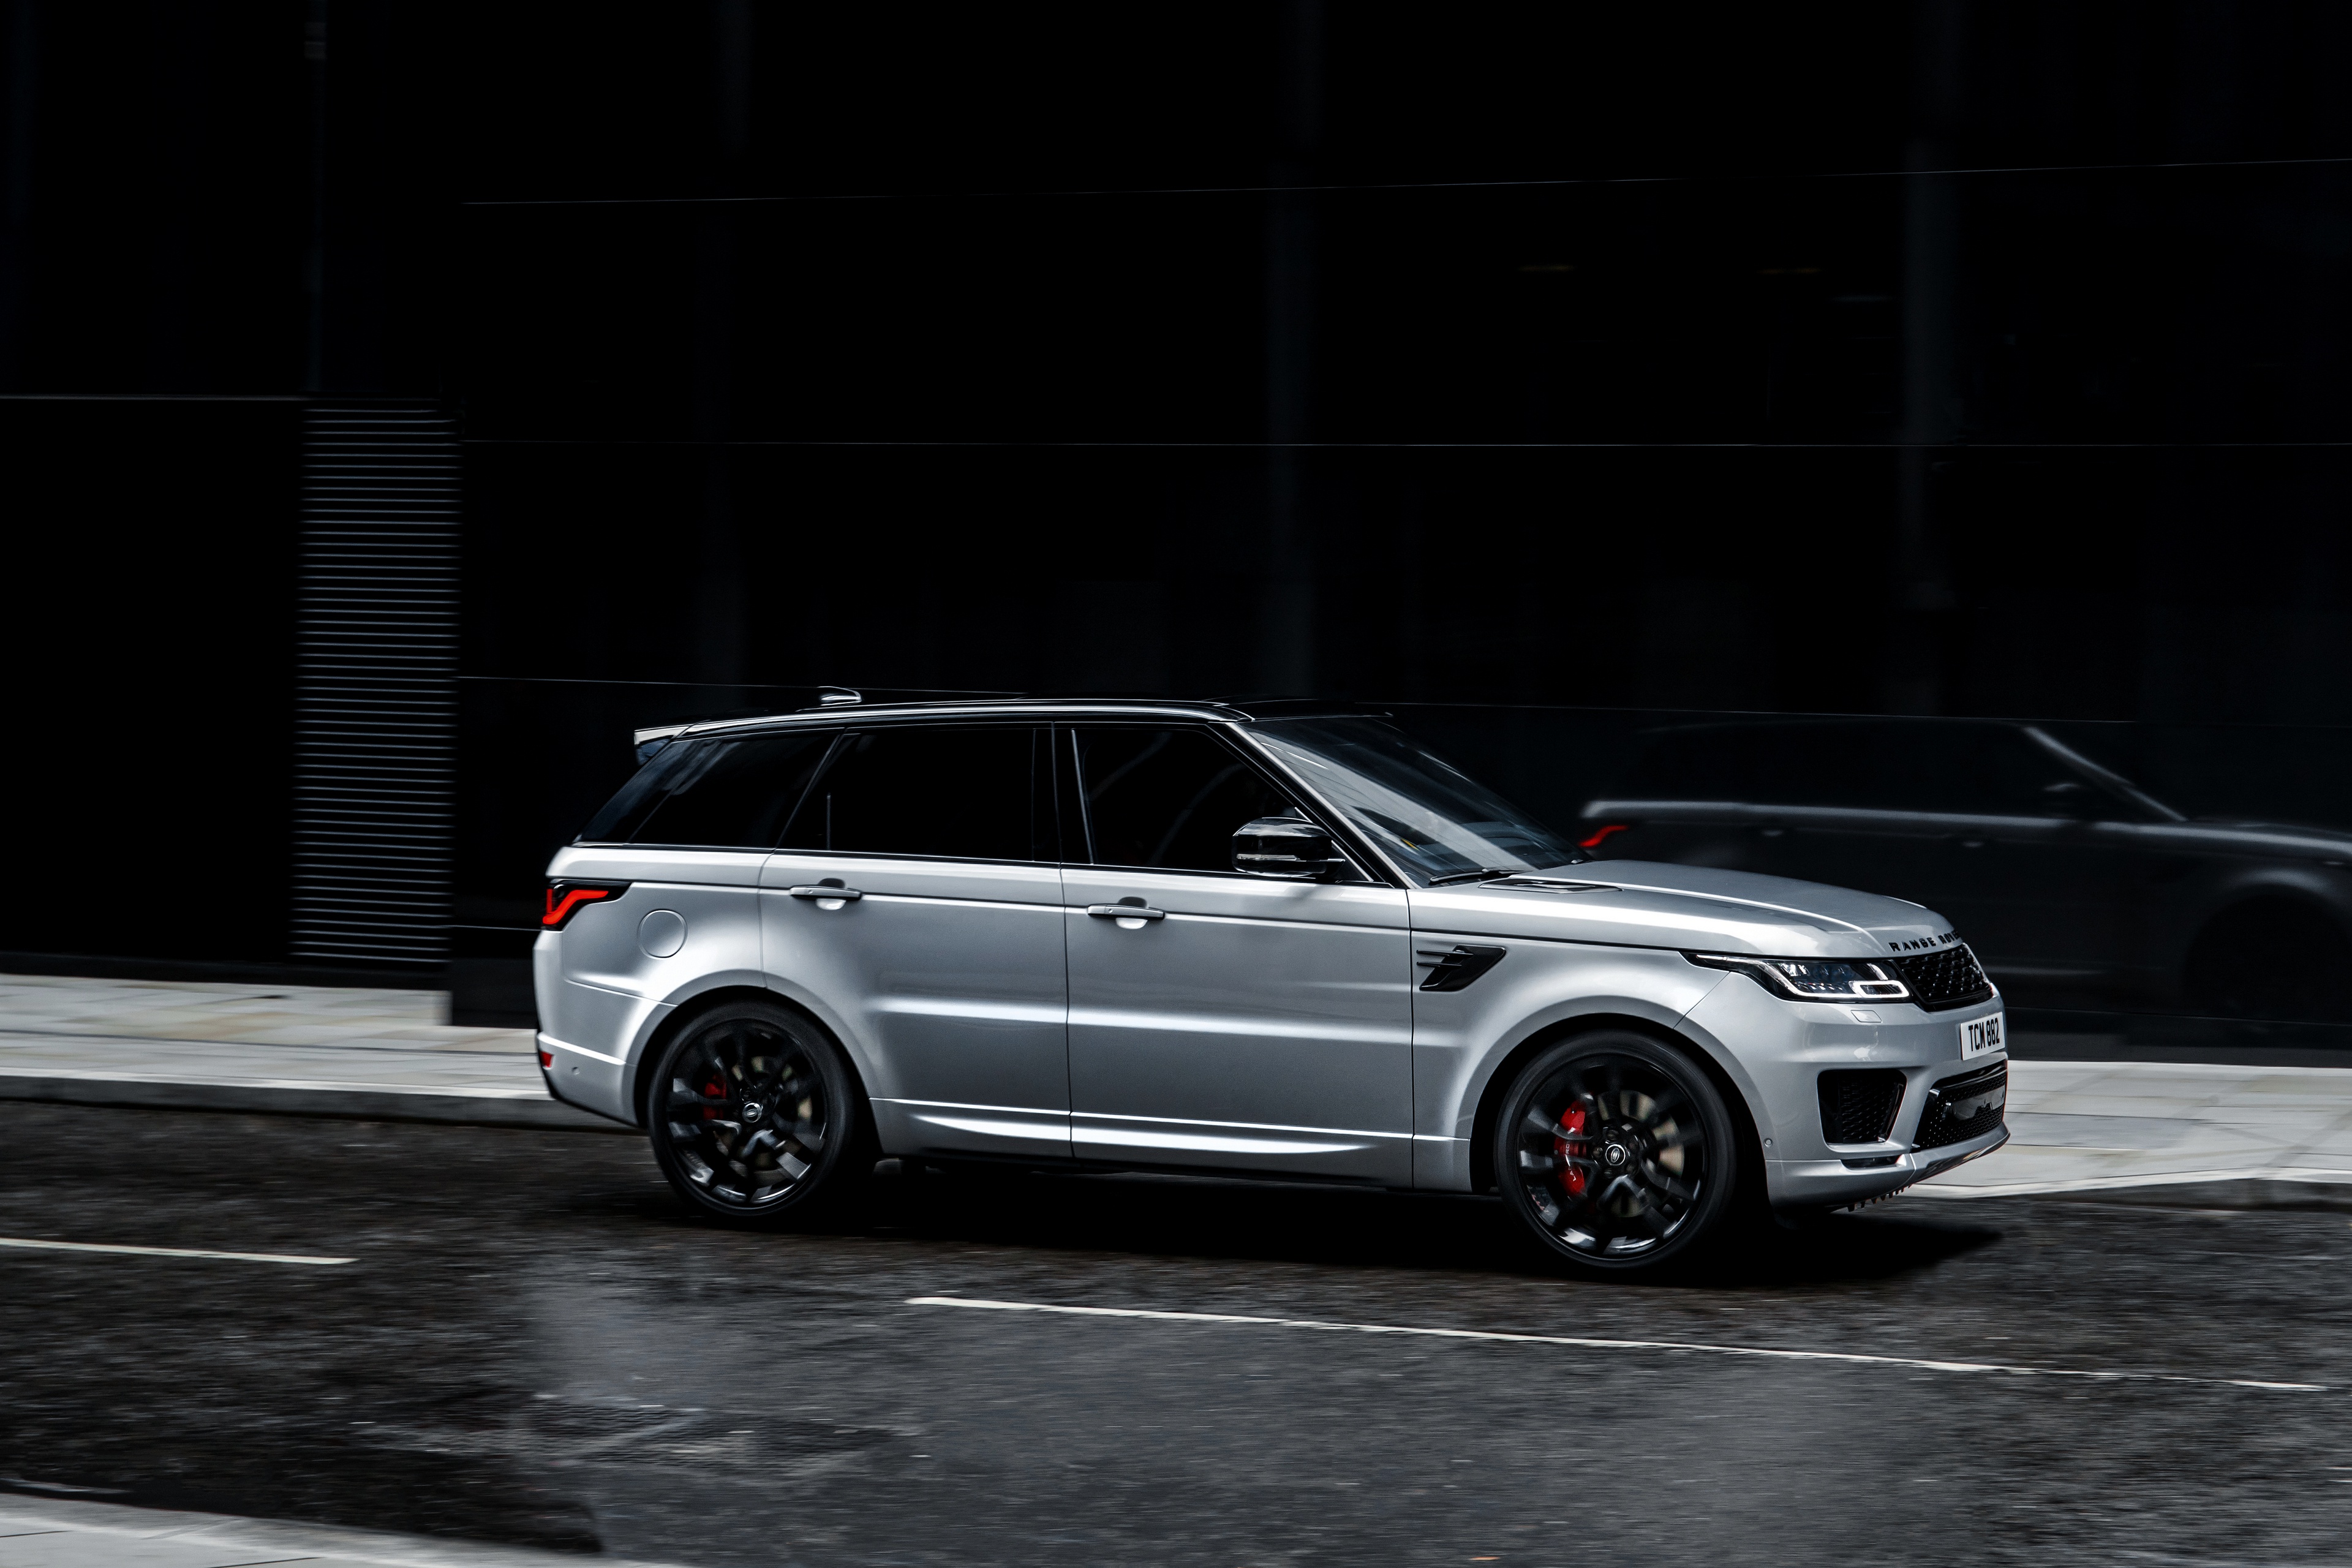 range rover sport, video game, car, land rover, silver car, suv, vehicle